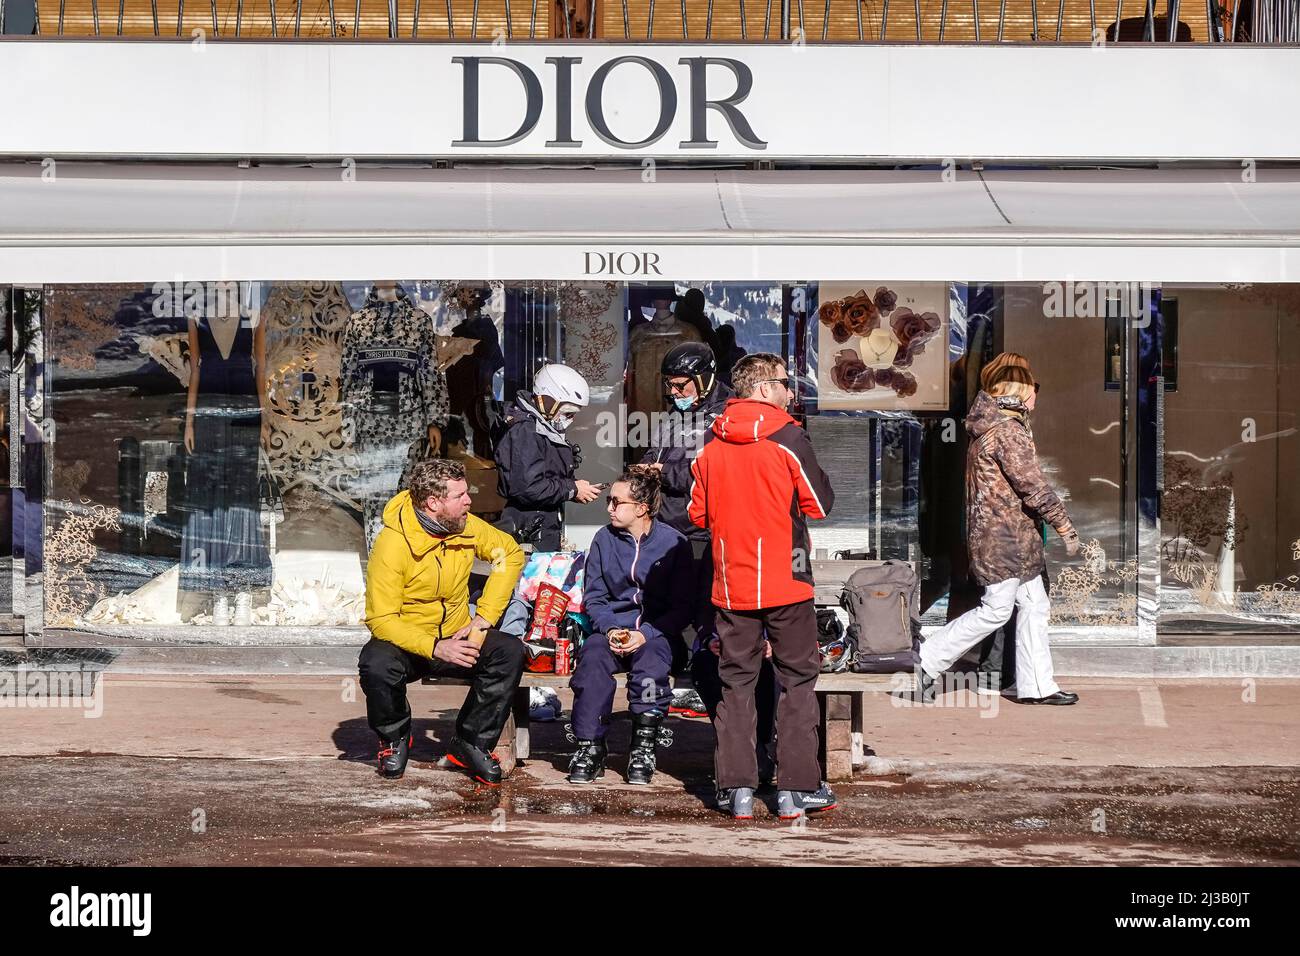 Shopping Mall, Dior, Courchevel, Savoie Department, France Stock Photo -  Alamy